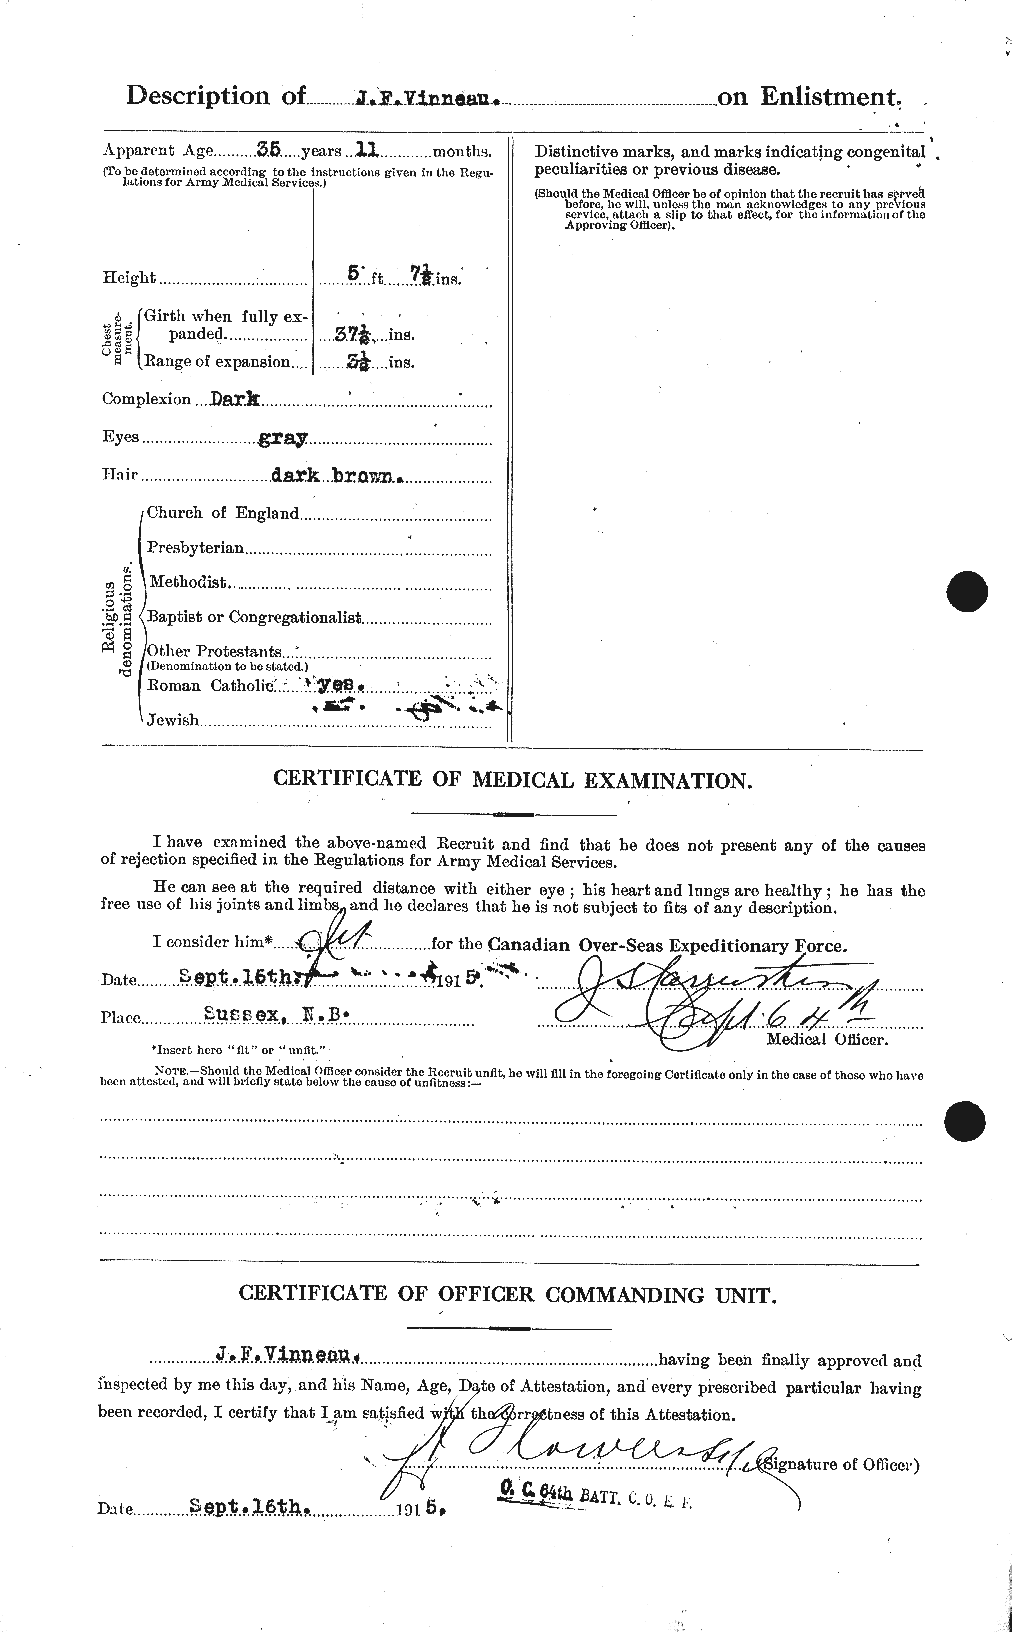 Personnel Records of the First World War - CEF 652378b